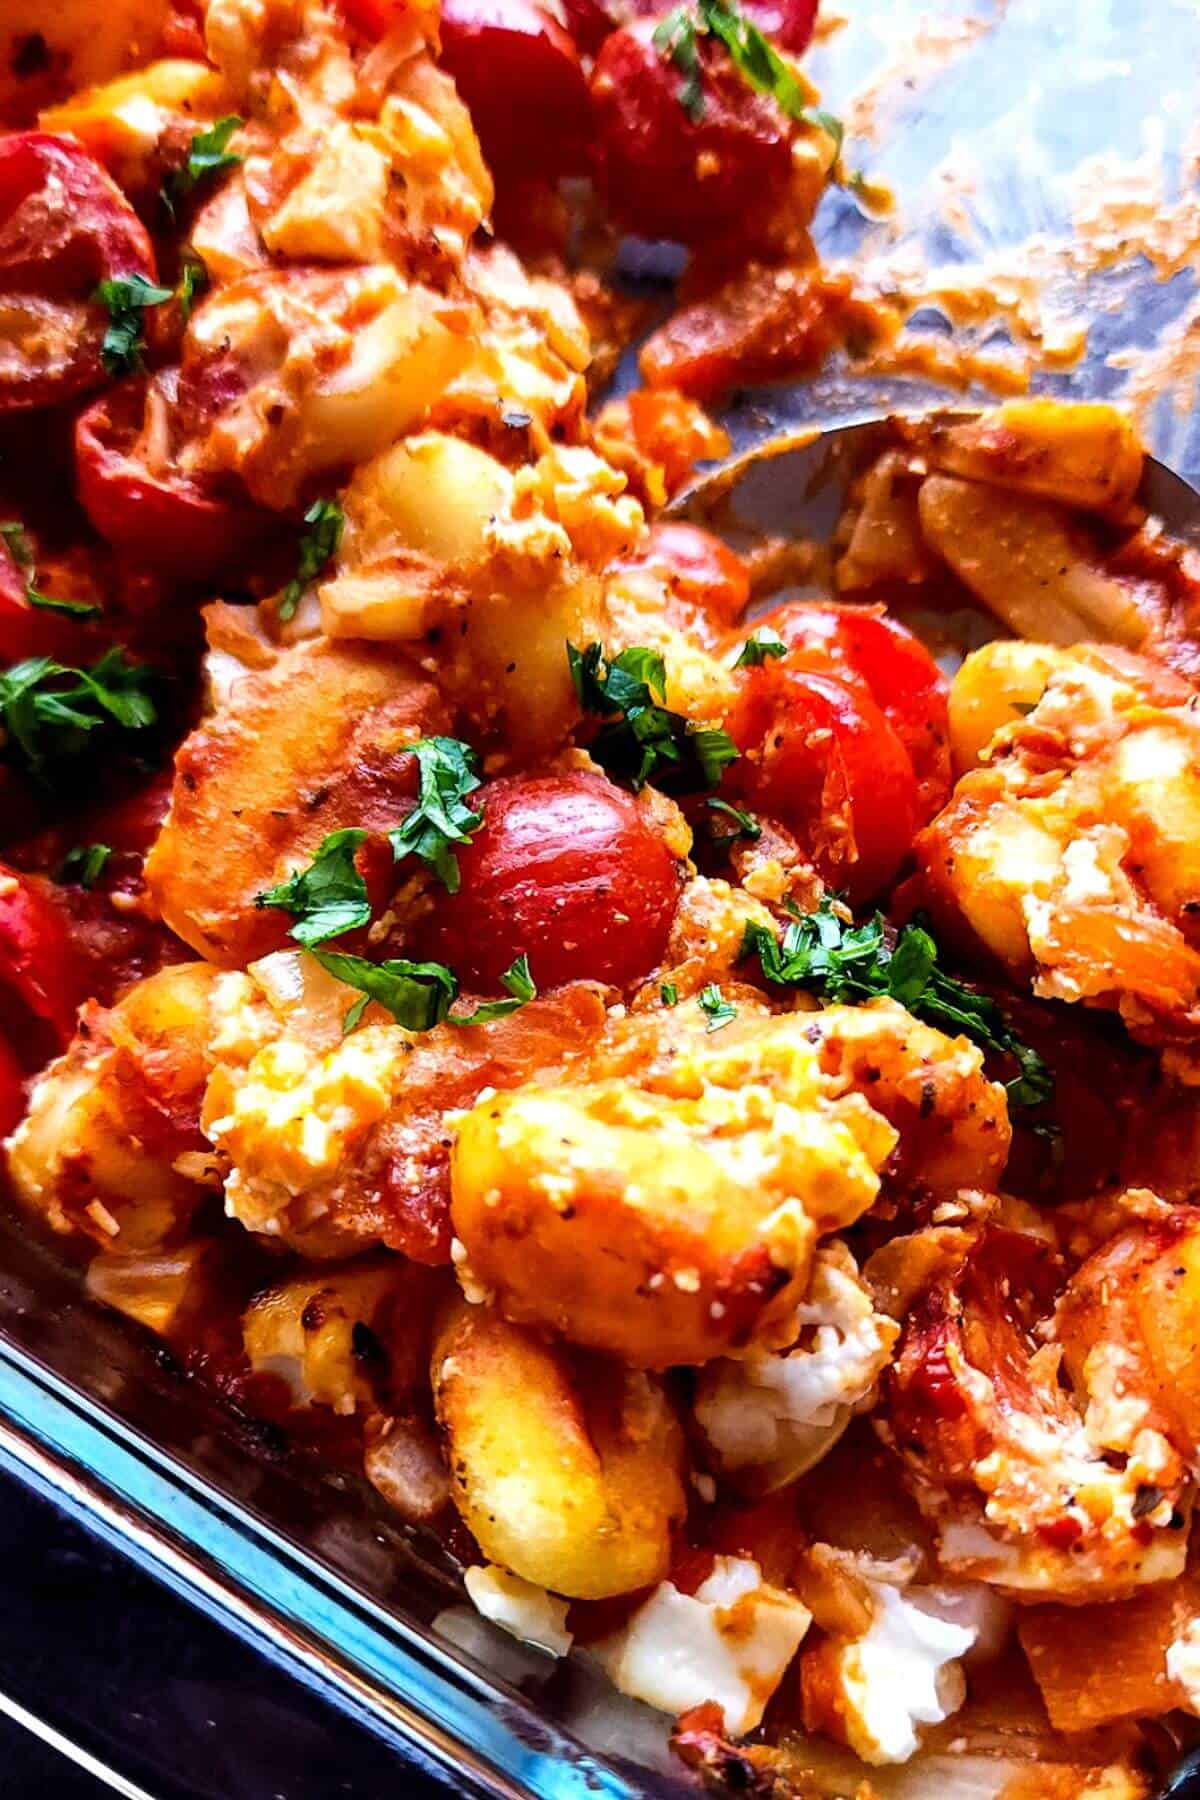 Gnocchi bake with cherry tomatoes and feta in a glass casserole.